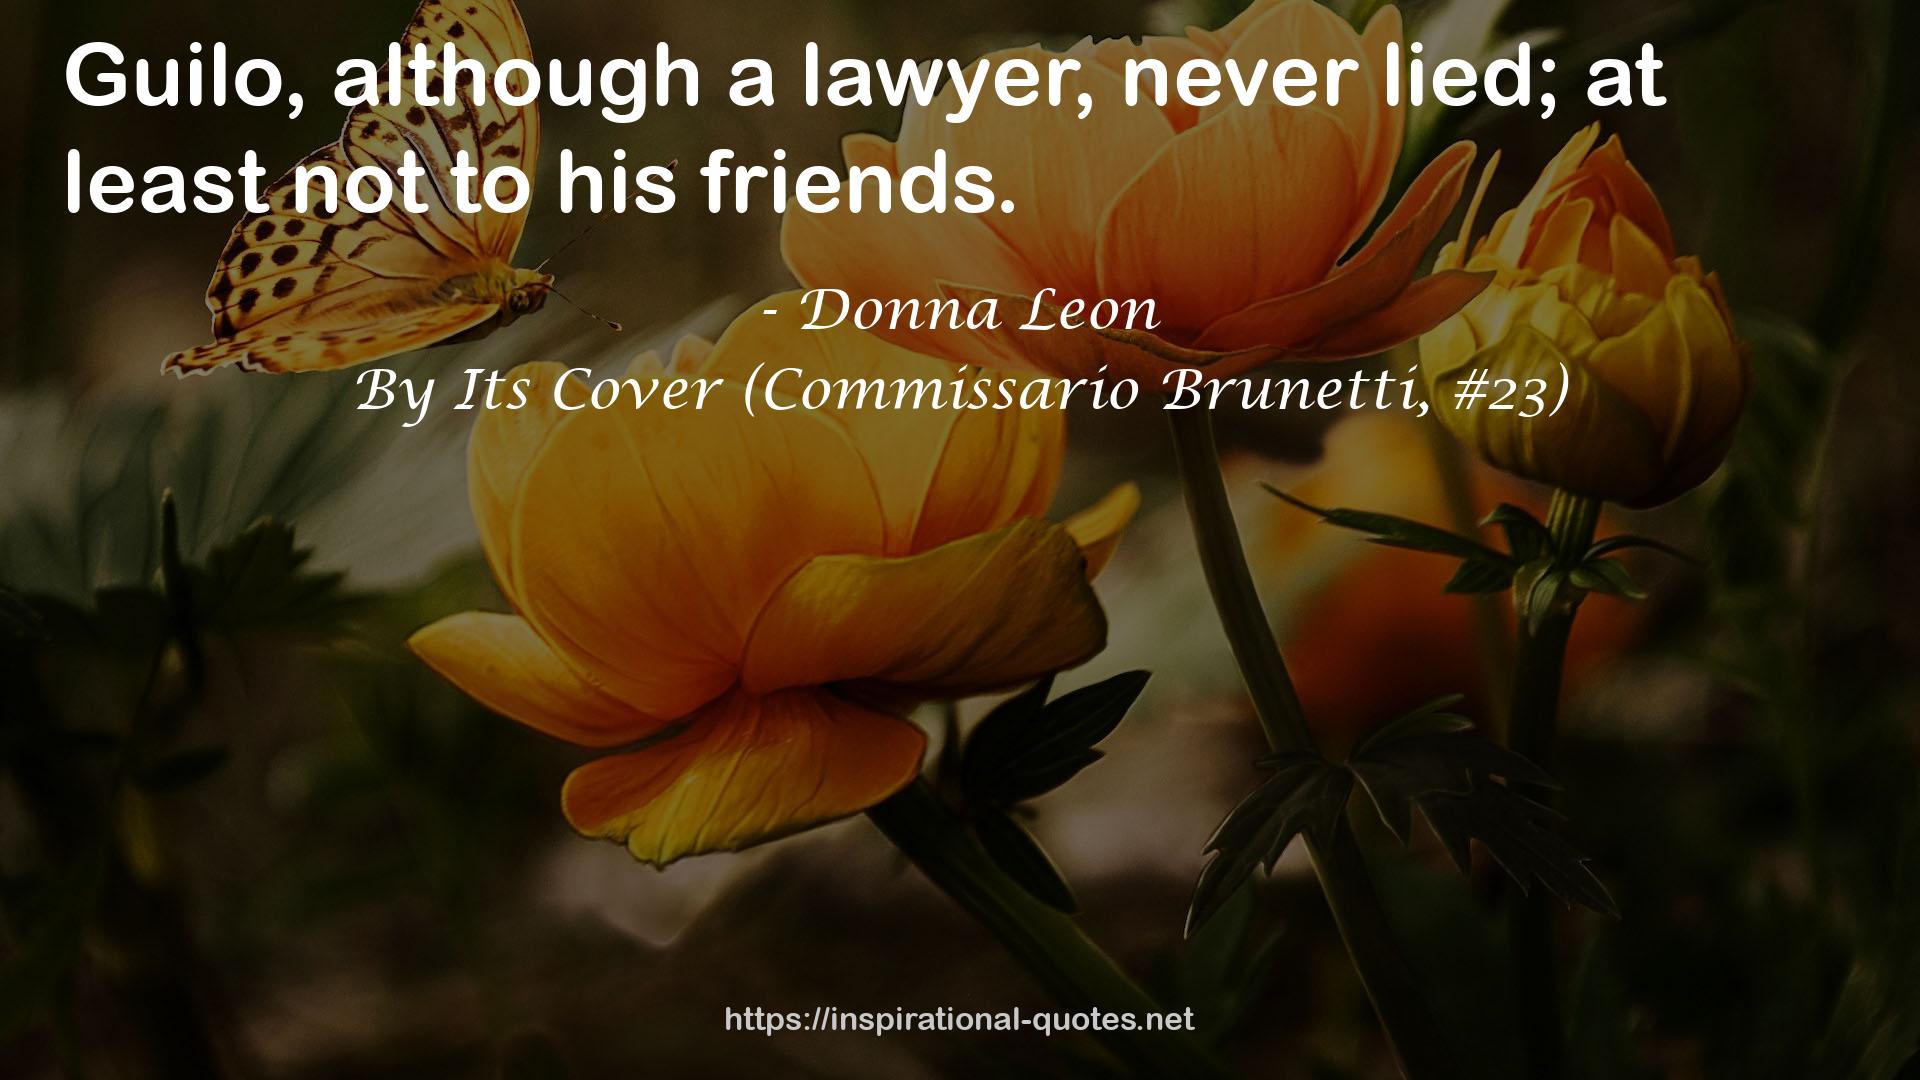 By Its Cover (Commissario Brunetti, #23) QUOTES